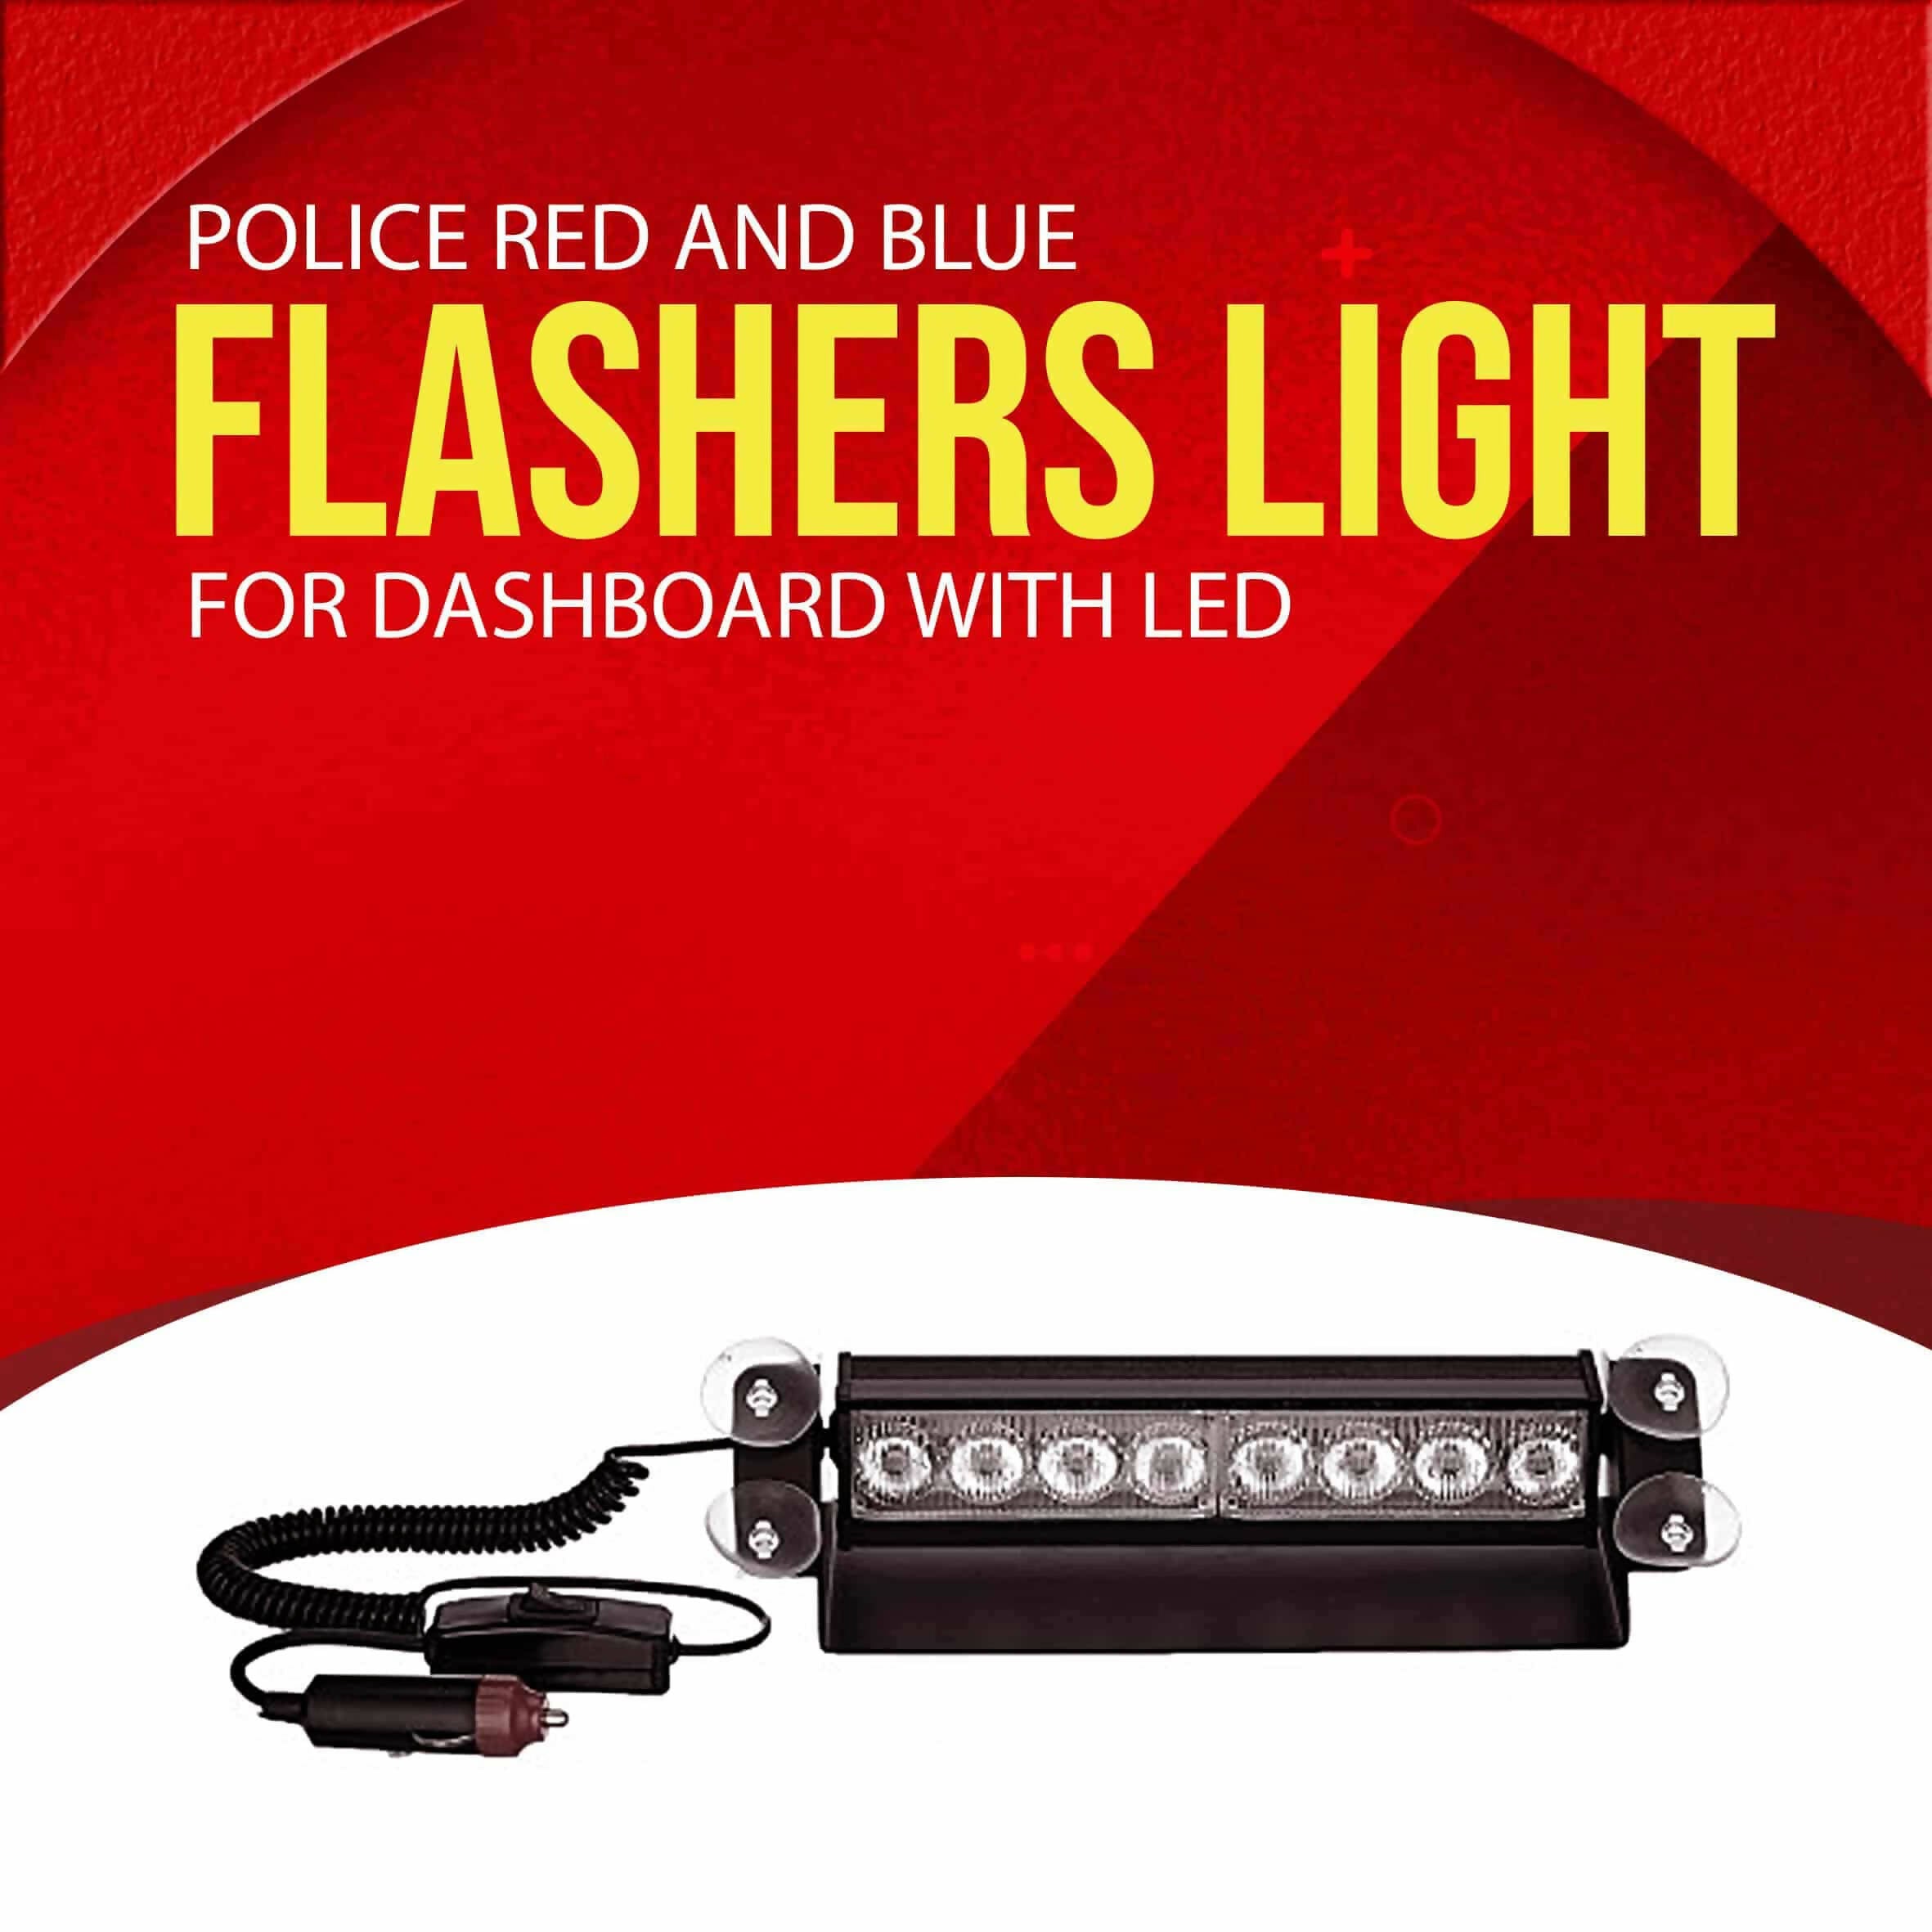 Police Red and Blue Flashers Light For Dashboard With LED